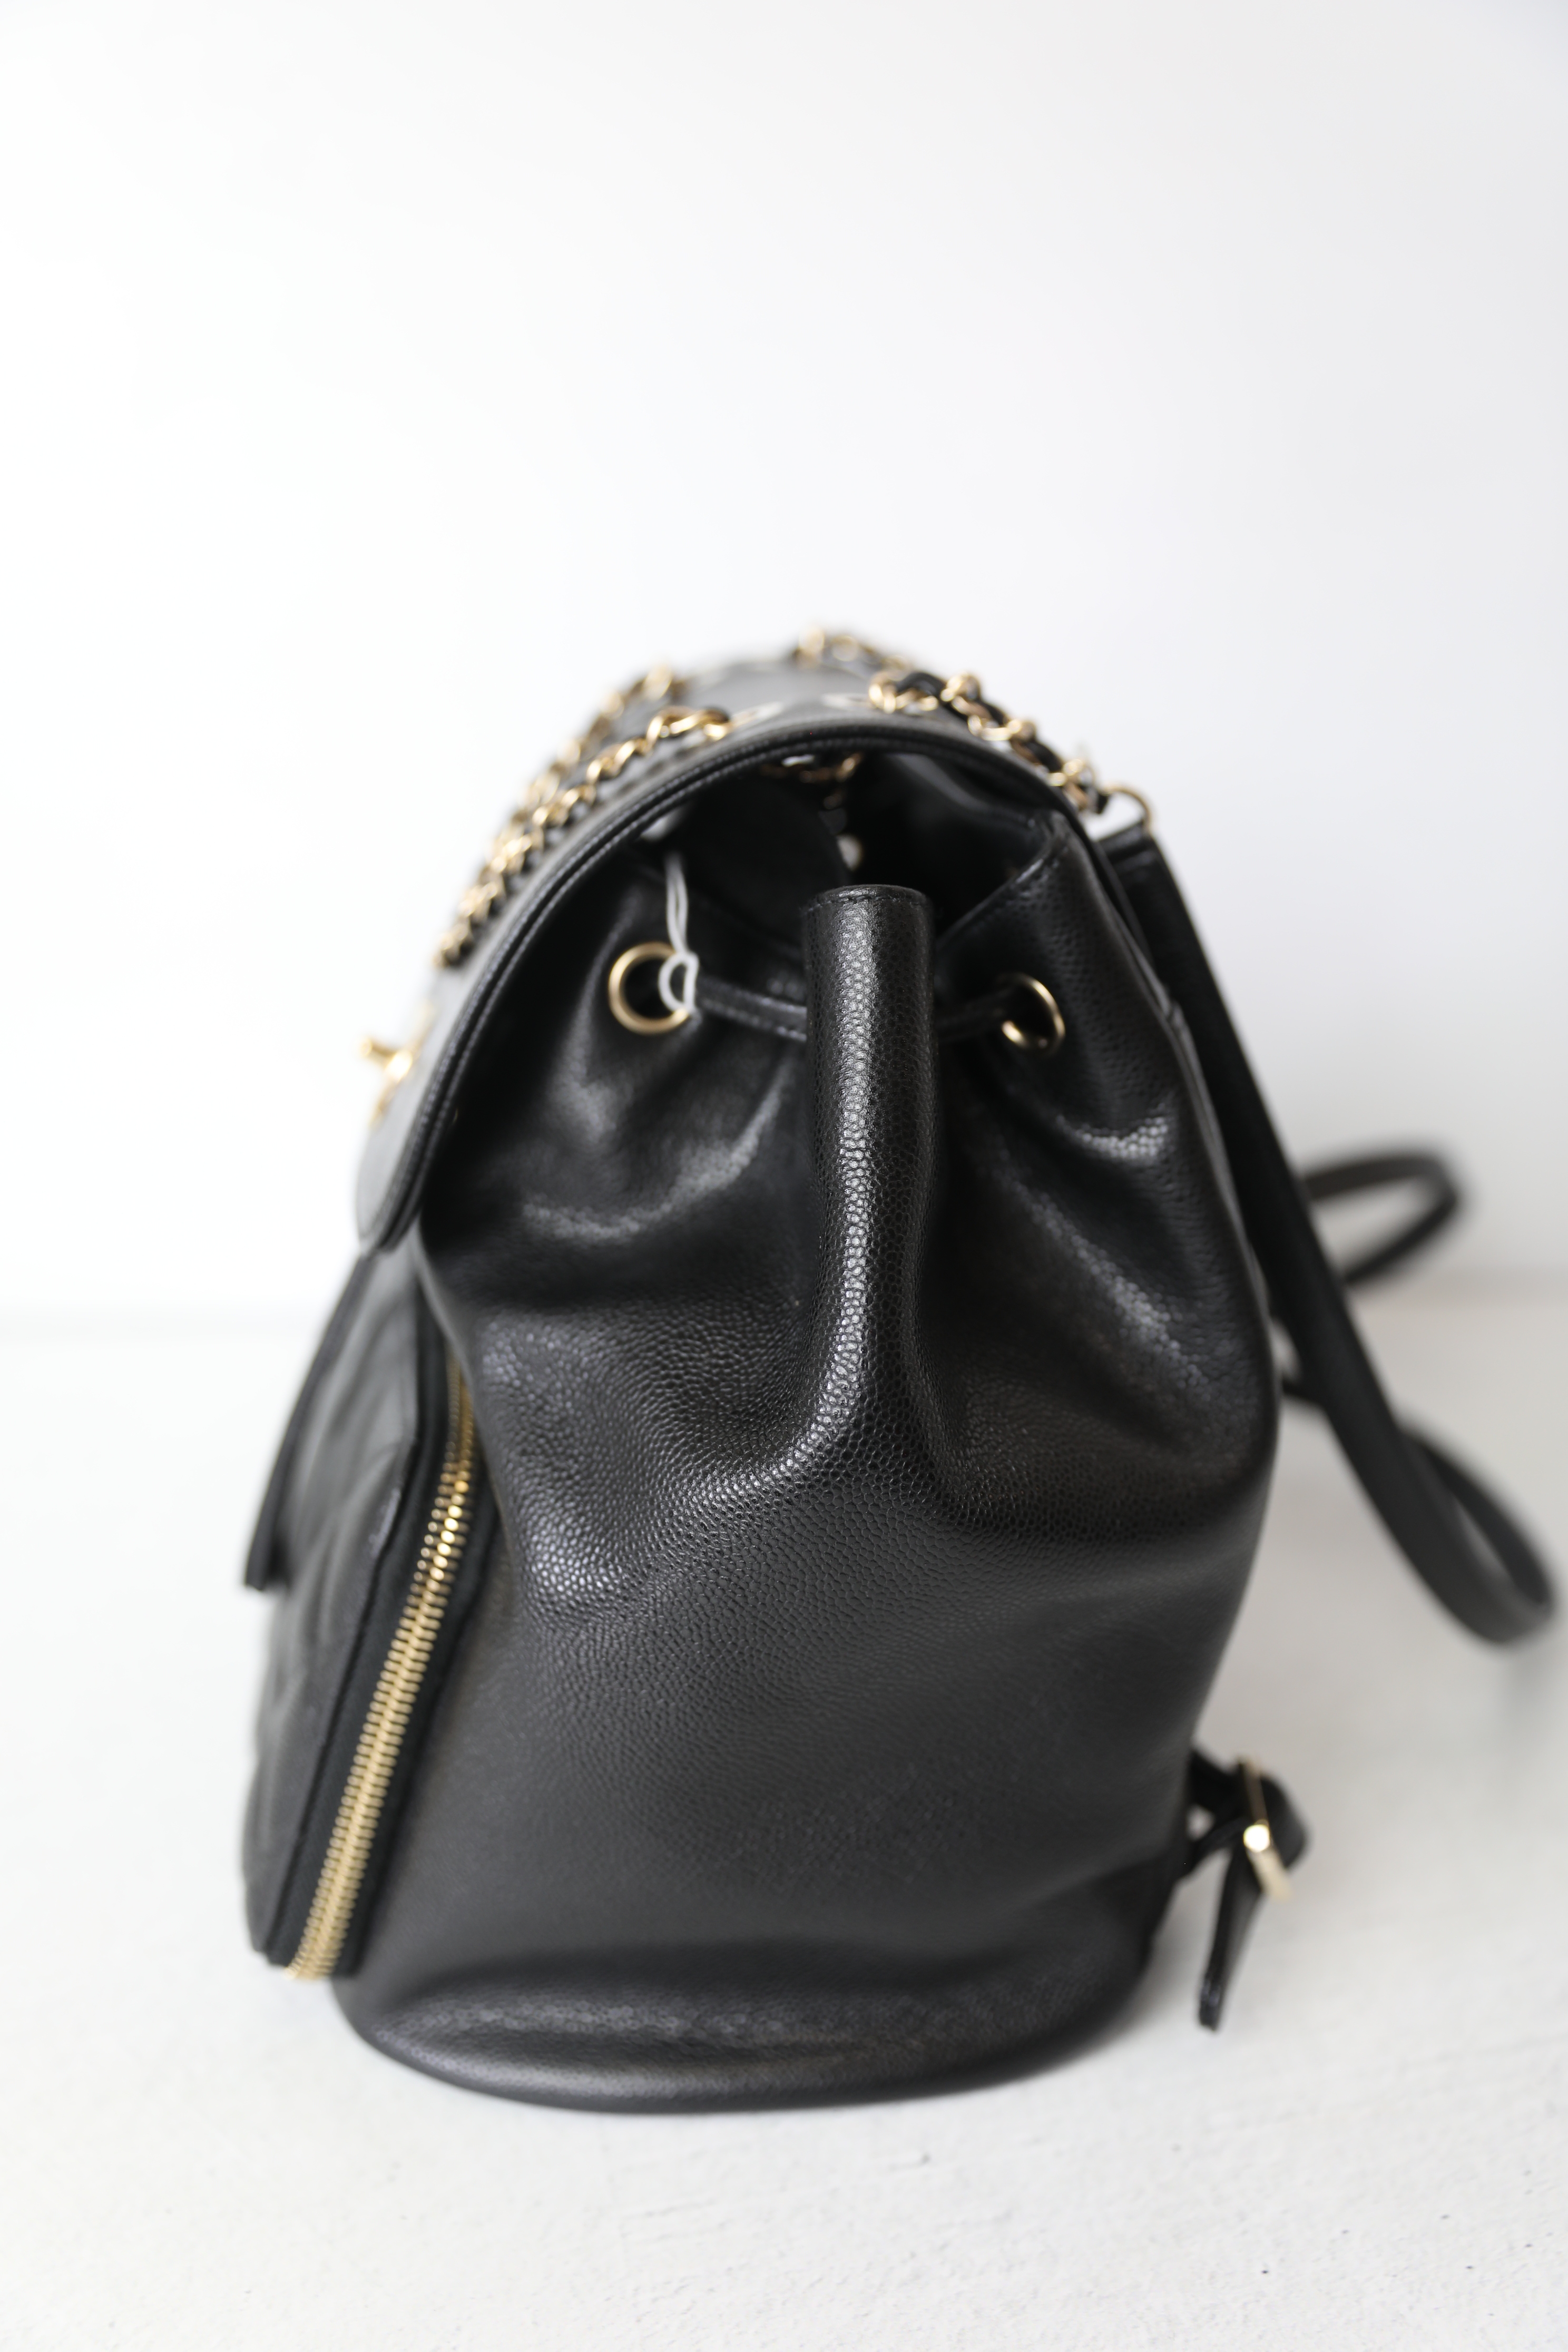 Chanel Medium Affinity Backpack, Black Caviar with Gold Hardware, Preowned  In Dustbag WA001 - Julia Rose Boston